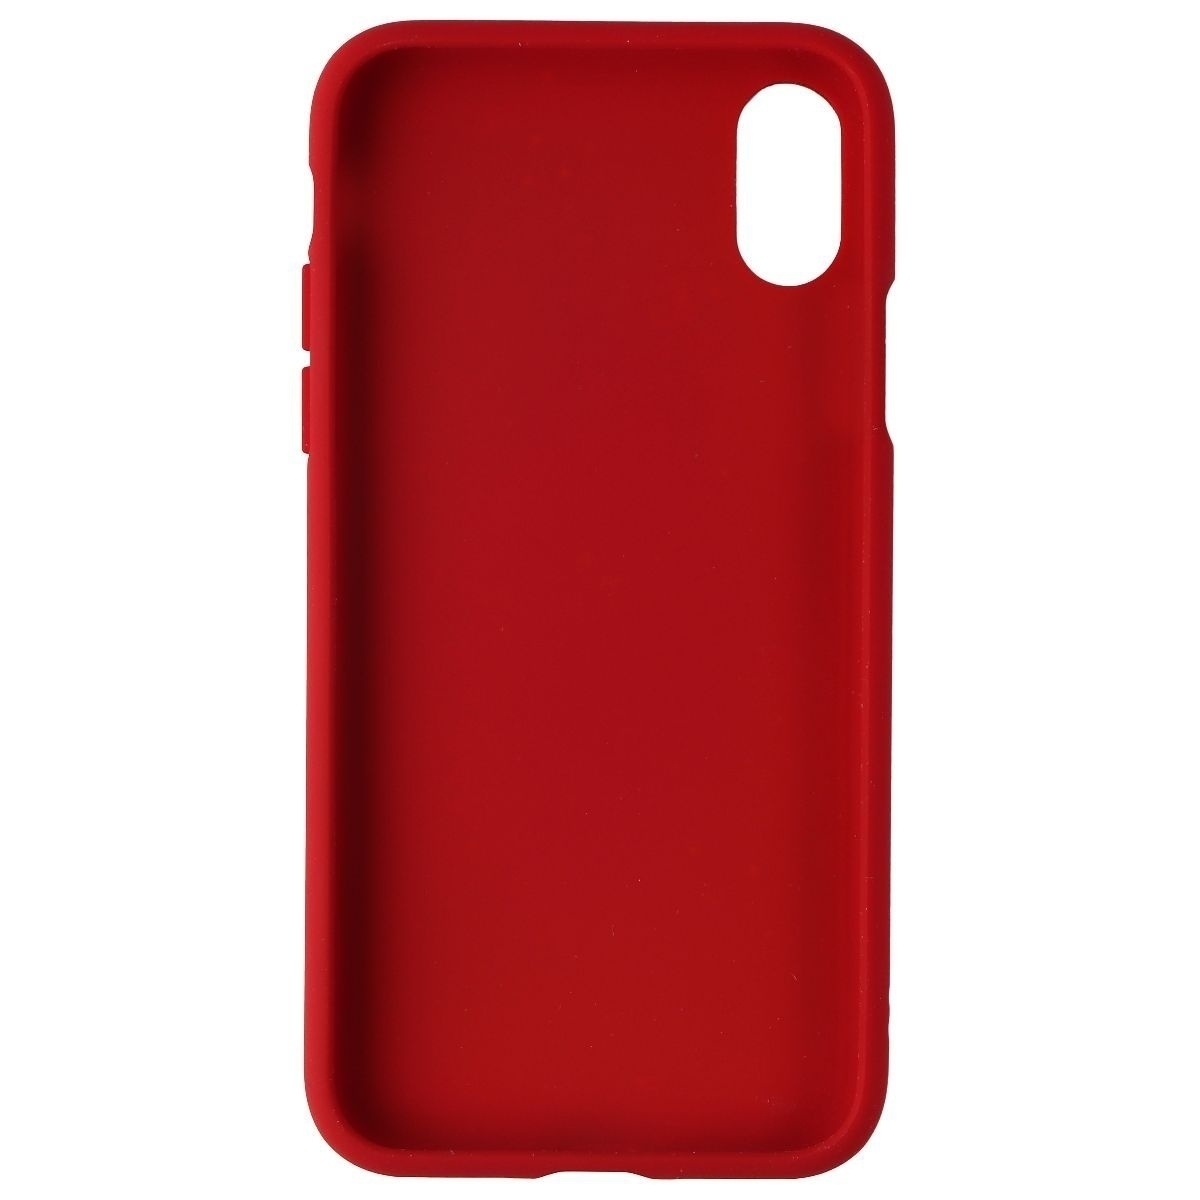 Adidas 3-Stripes Snap Case For Apple IPhone Xs/X - Red